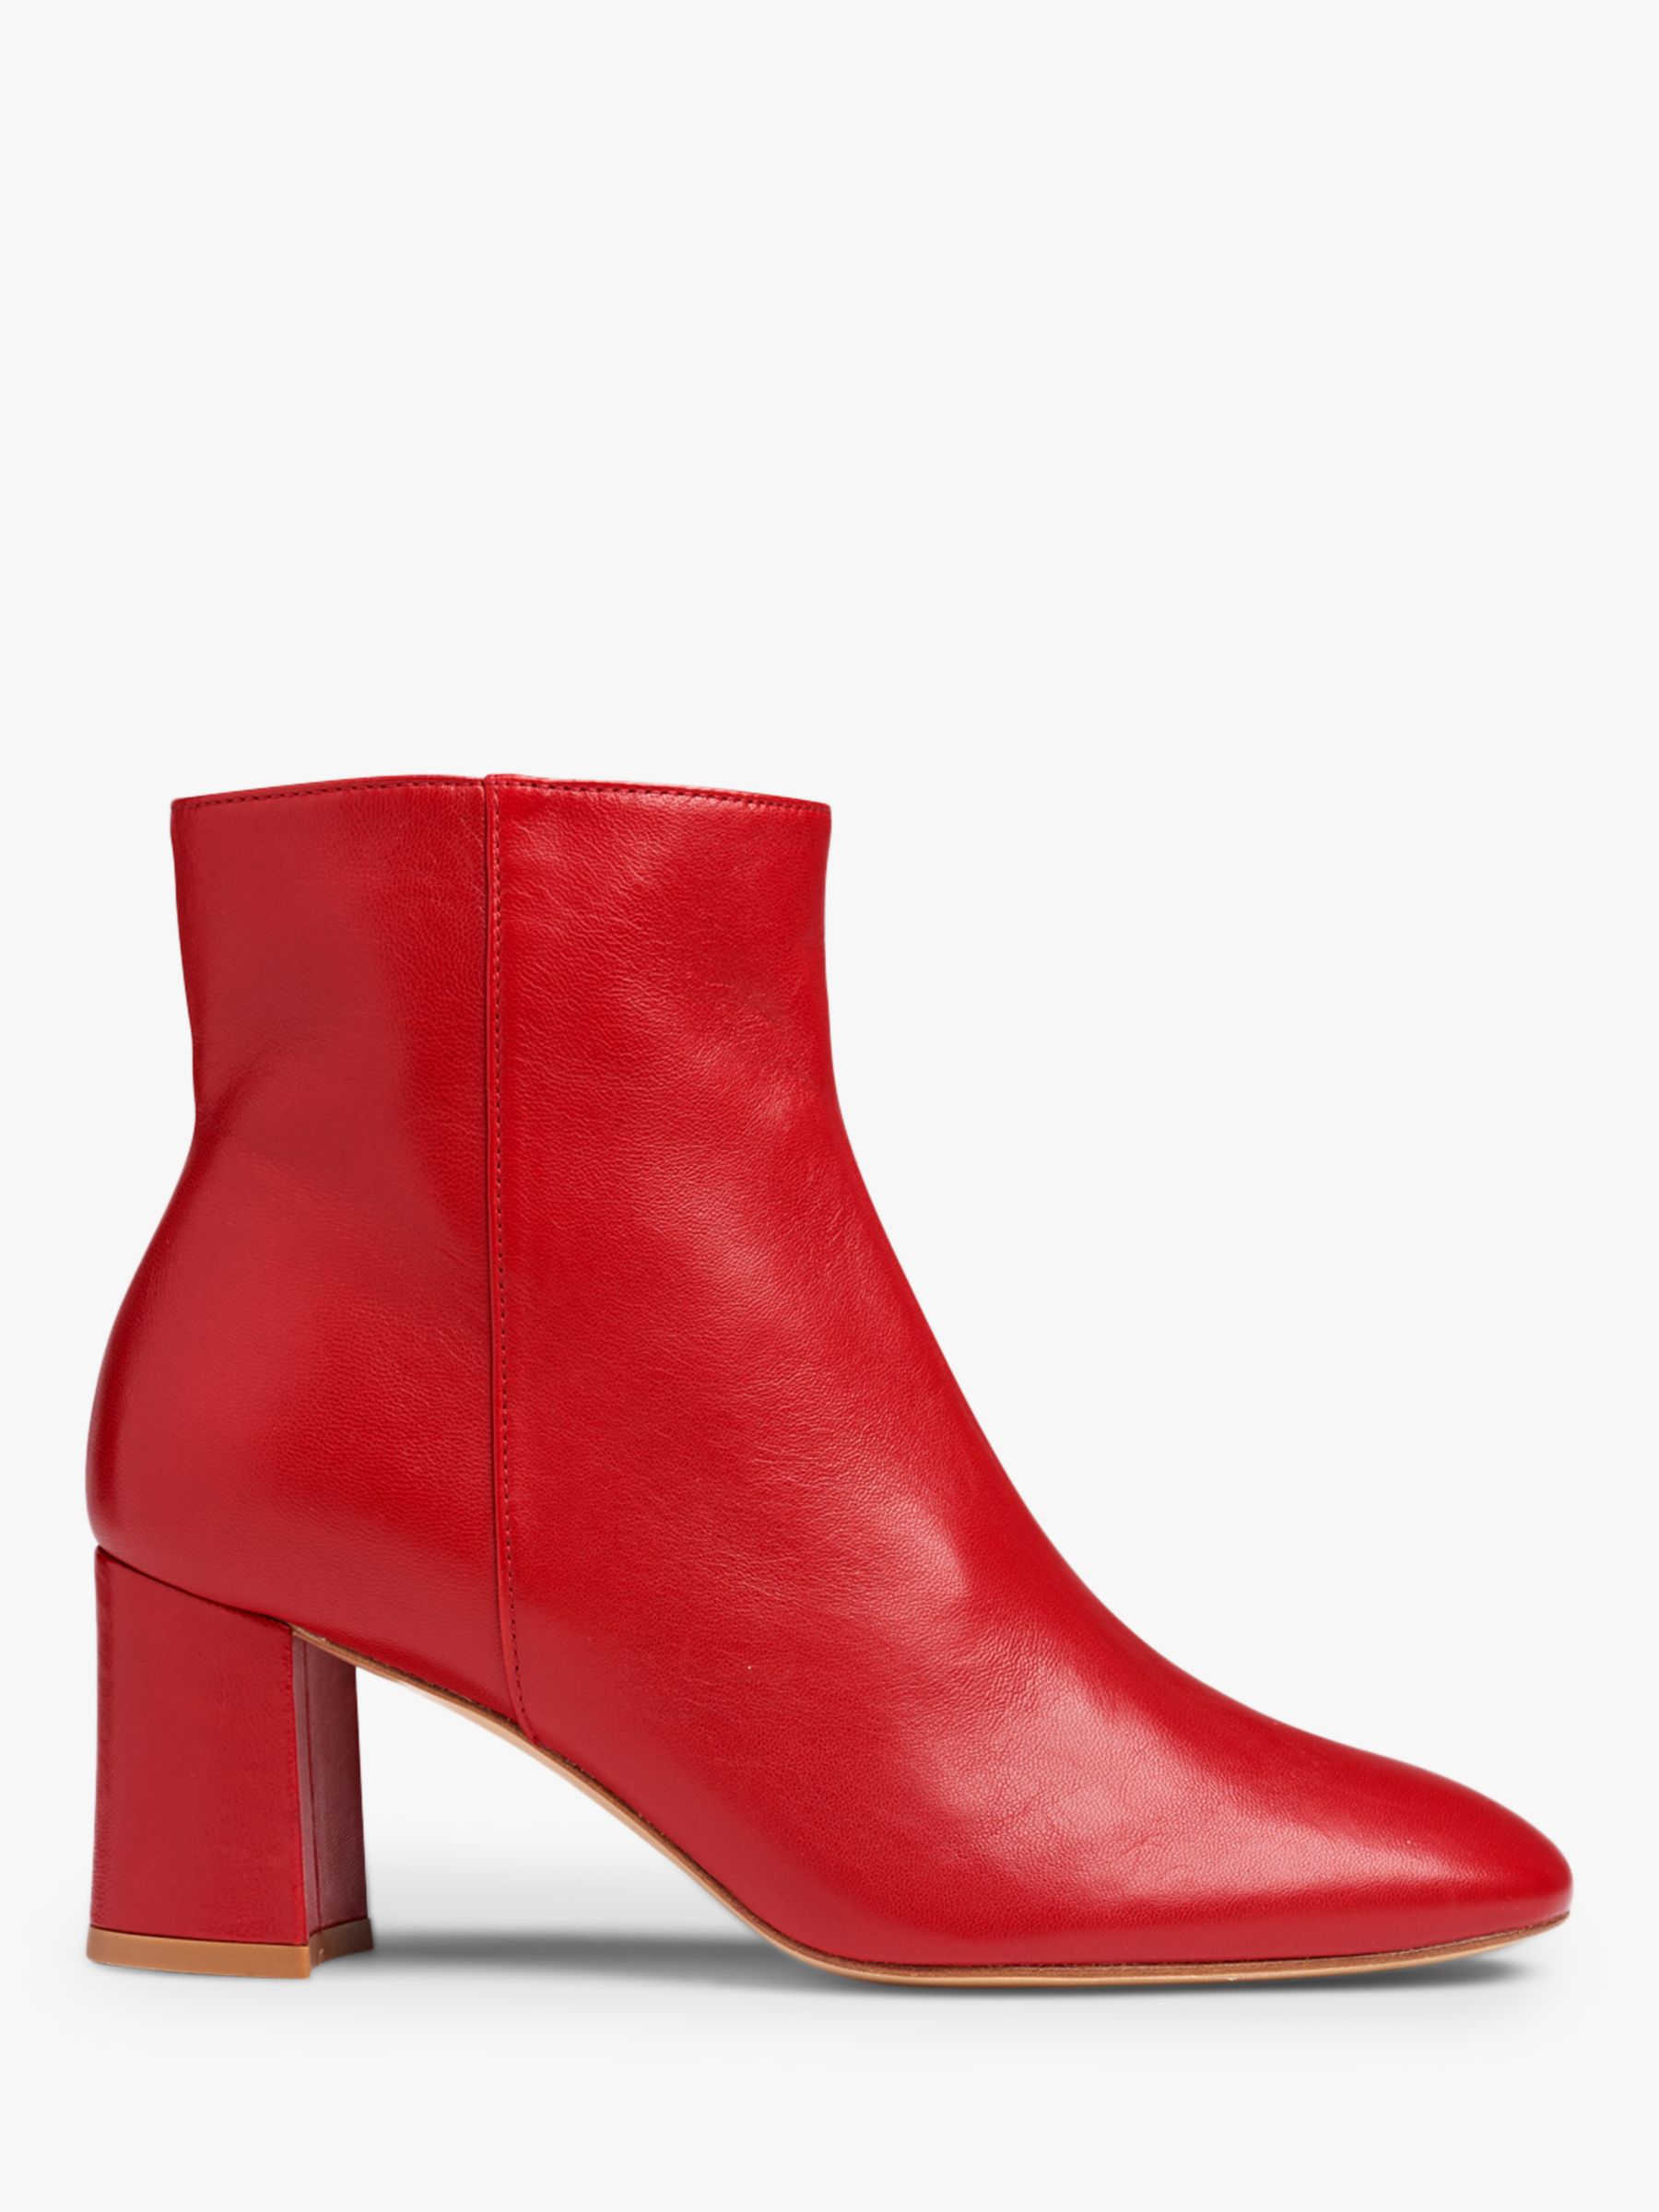 L.K.Bennett Jette Leather Ankle Boots, Red at John Lewis & Partners - 웹